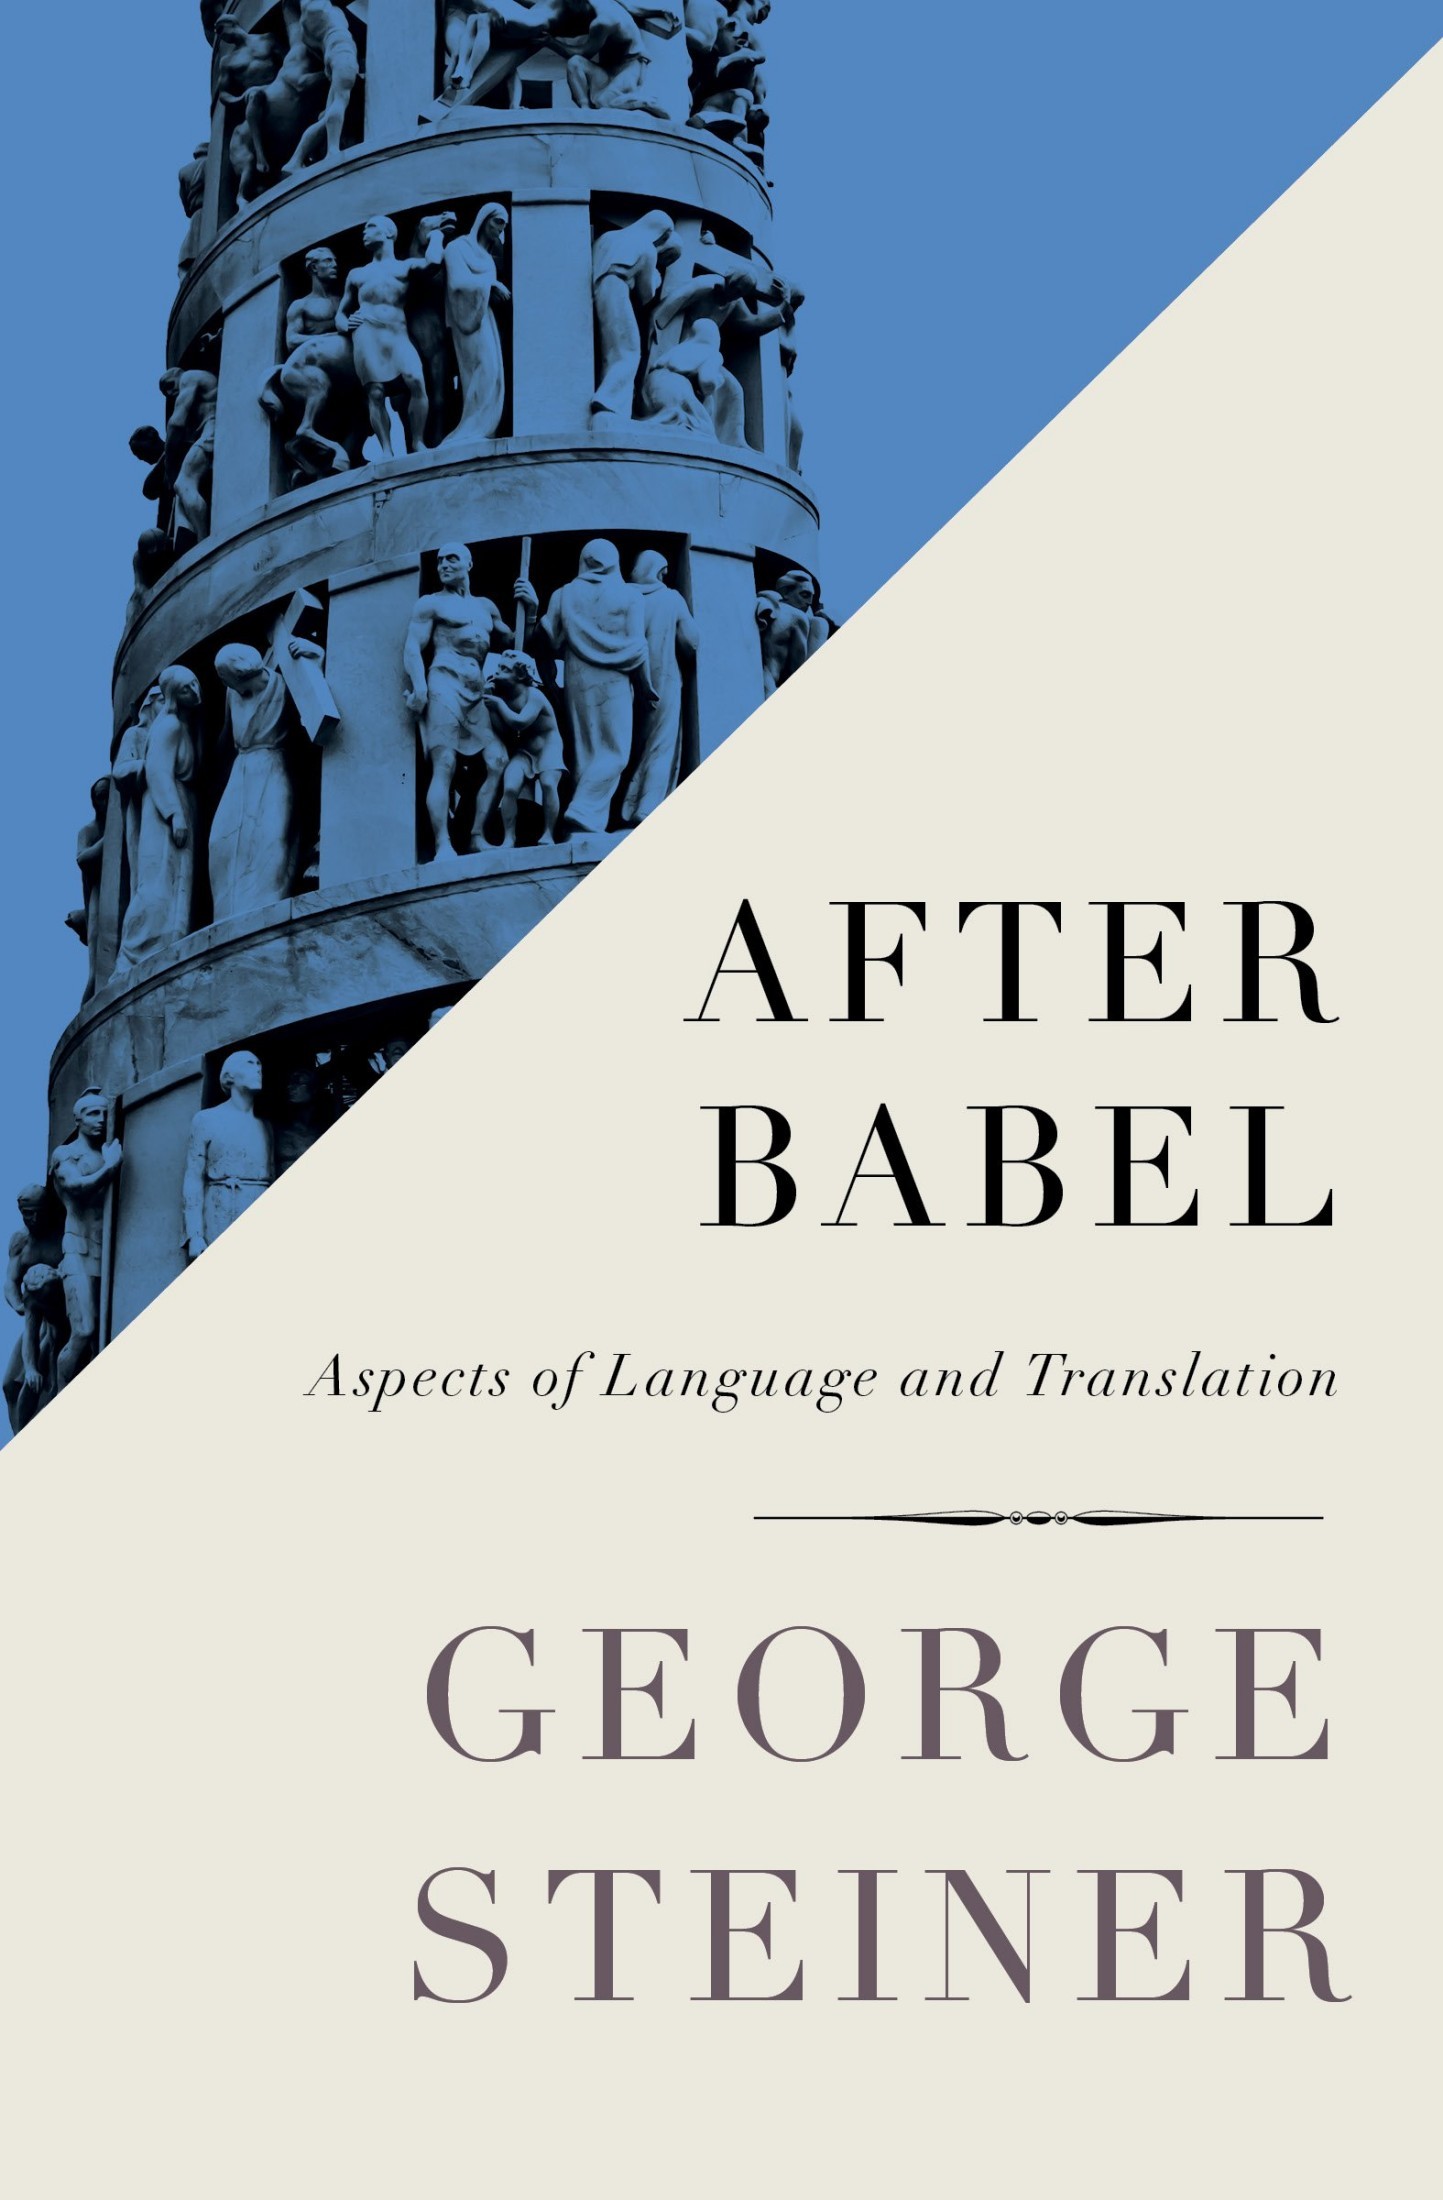 After Babel: Aspects of Language and Translation